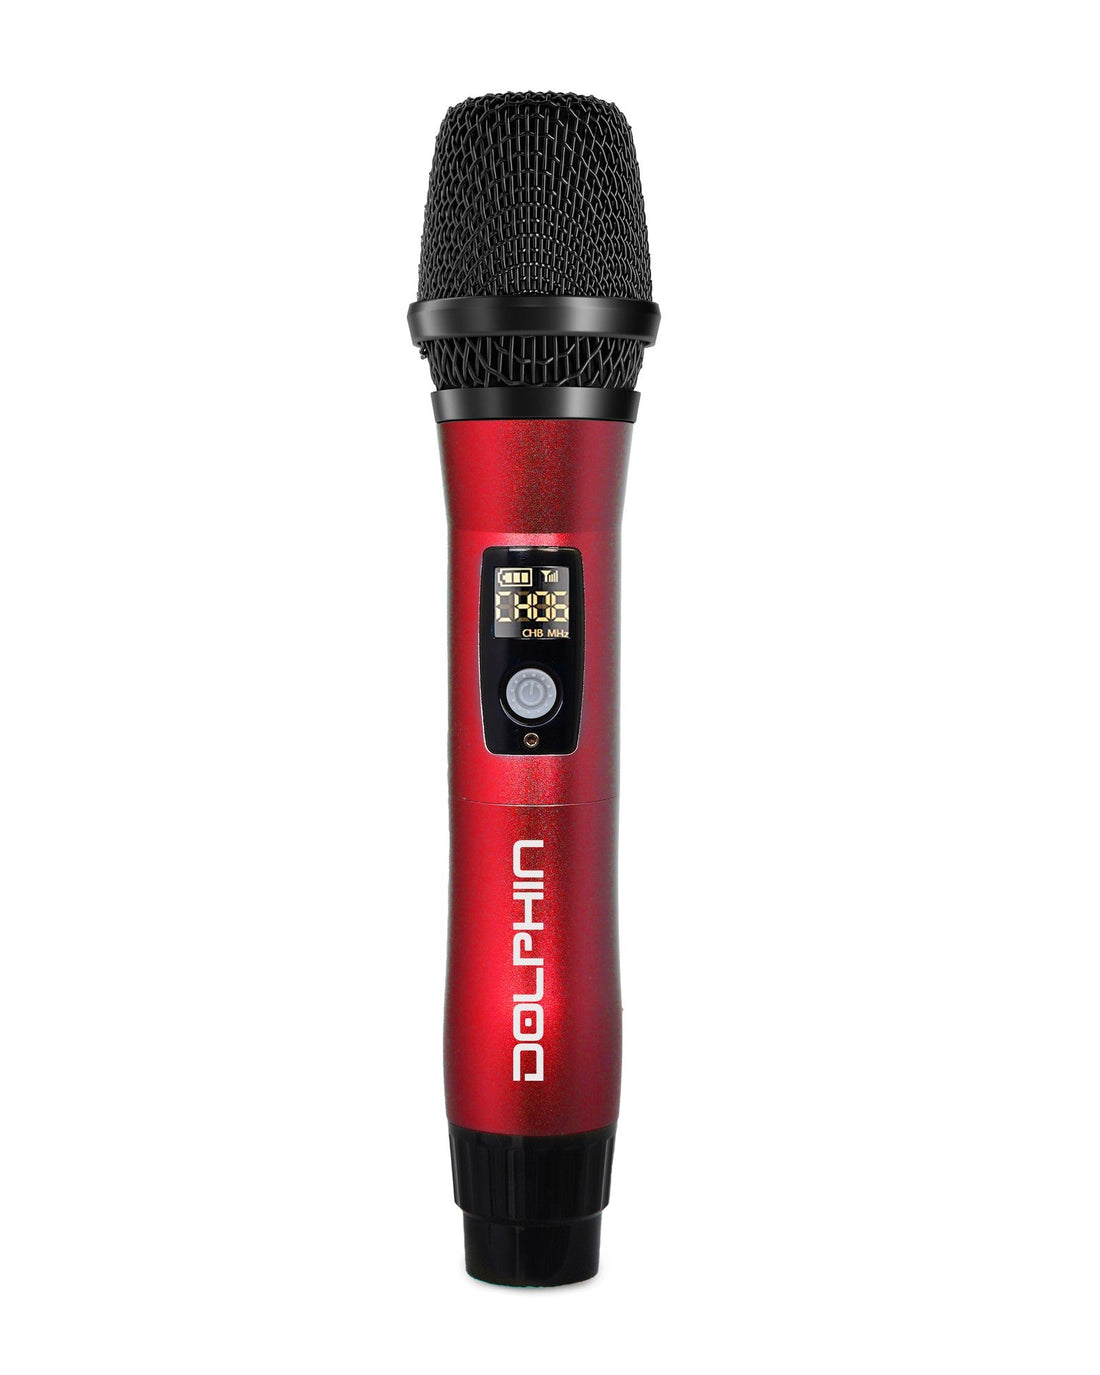 Dolphin MCX11 UHF Wireless Microphone - USB-C Rechargeable, 50 Channels, Anti-Interference Technology - Top ElectrosMicrophonesMCX11-RED810059431591